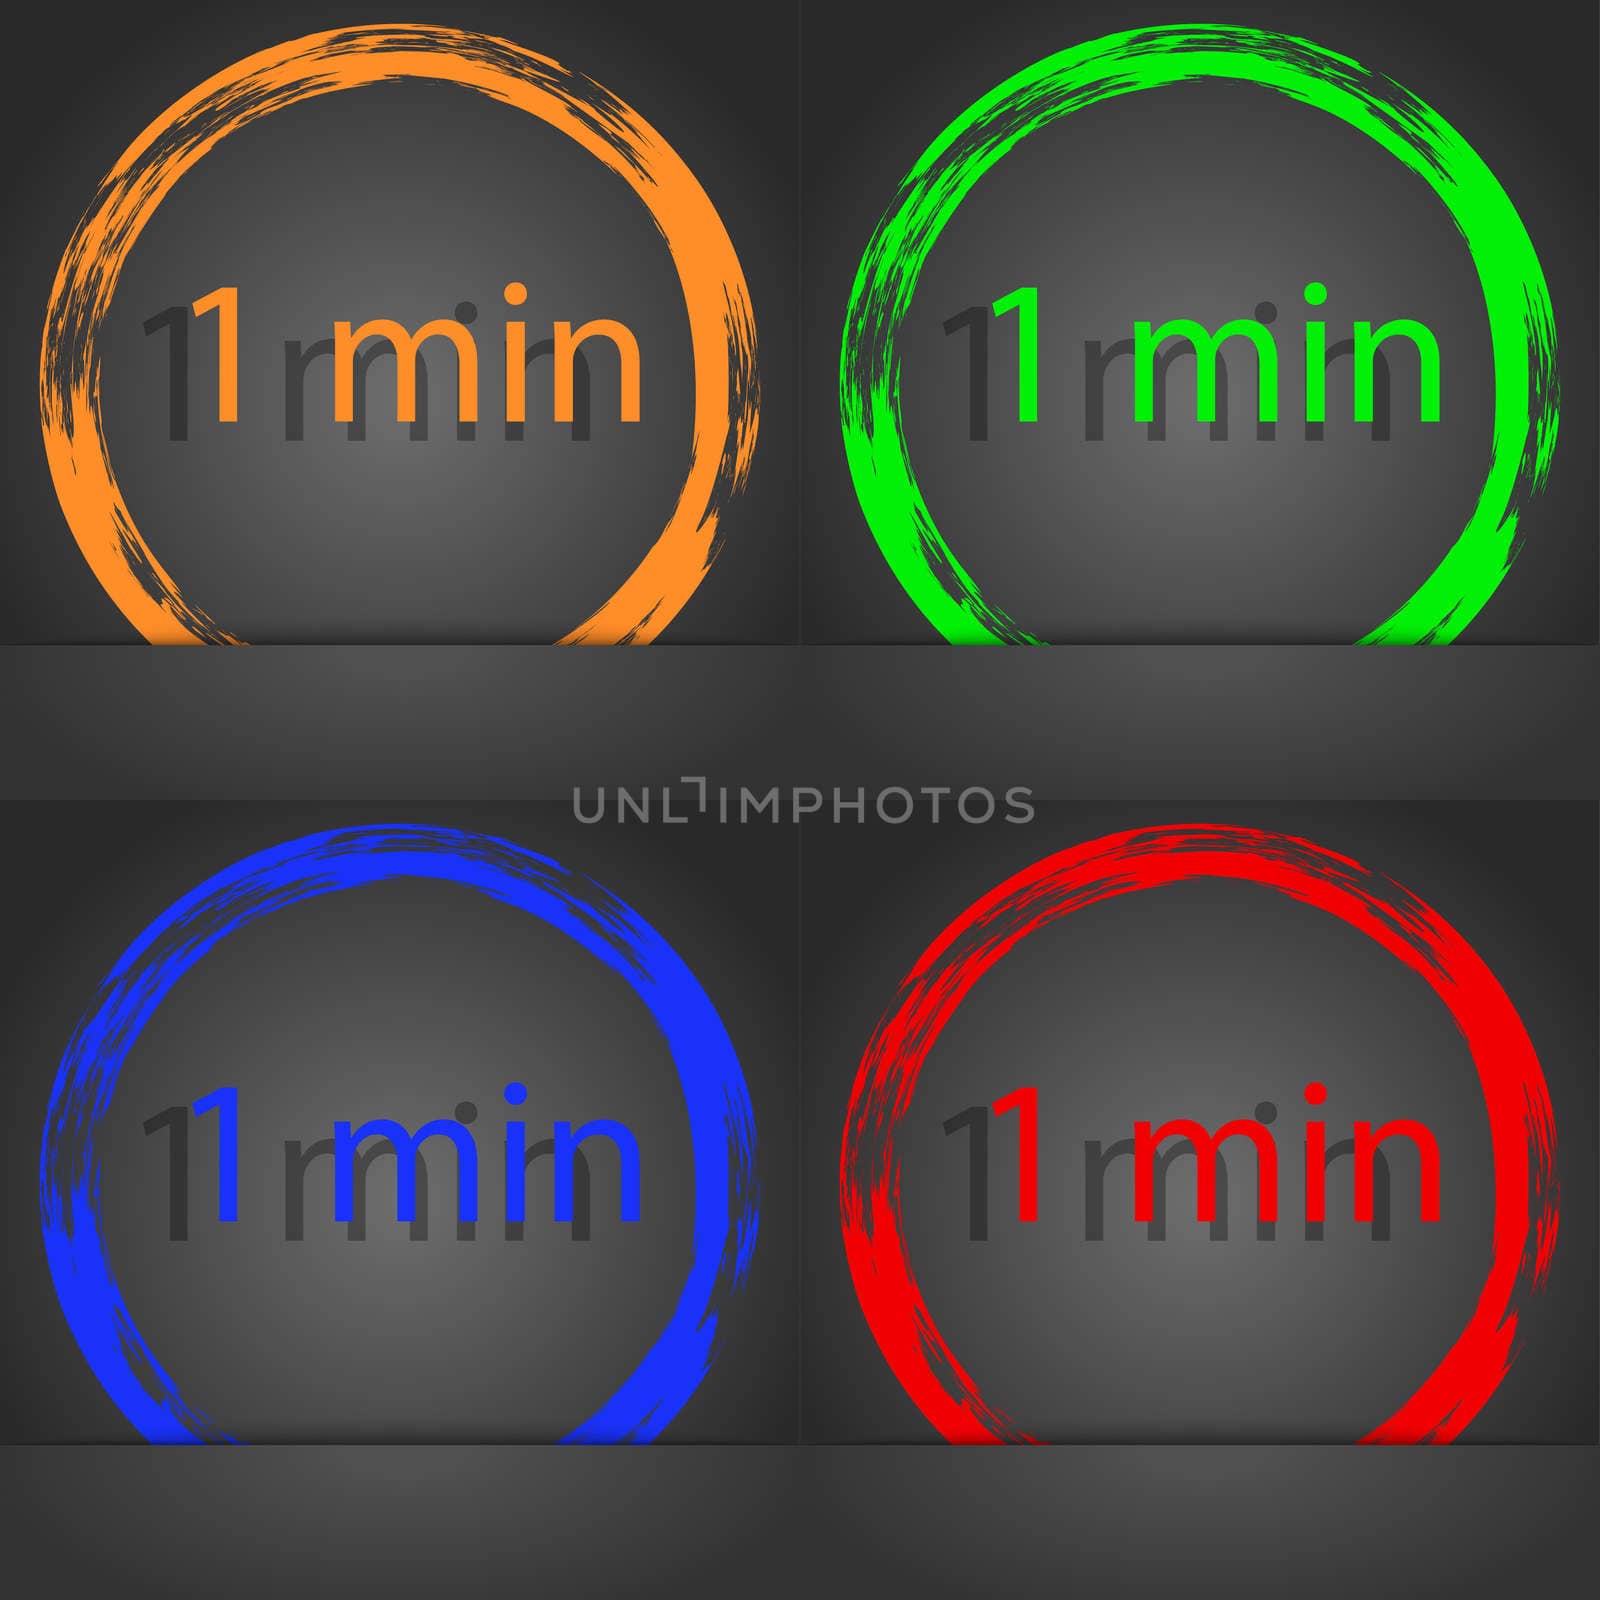 1 minutes sign icon. Fashionable modern style. In the orange, green, blue, red design. illustration